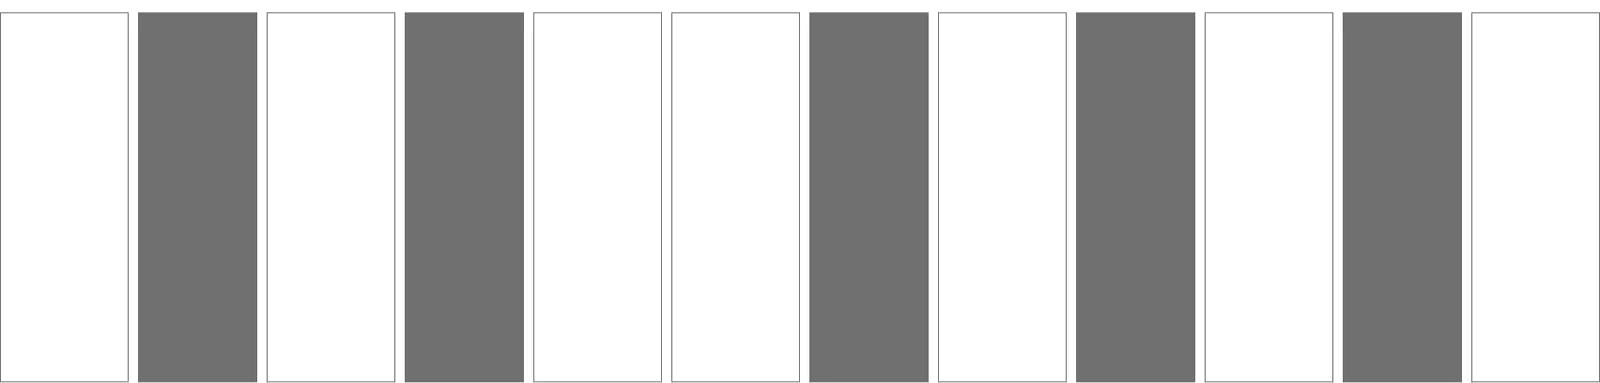 The same series of rectanges with the colors reversed